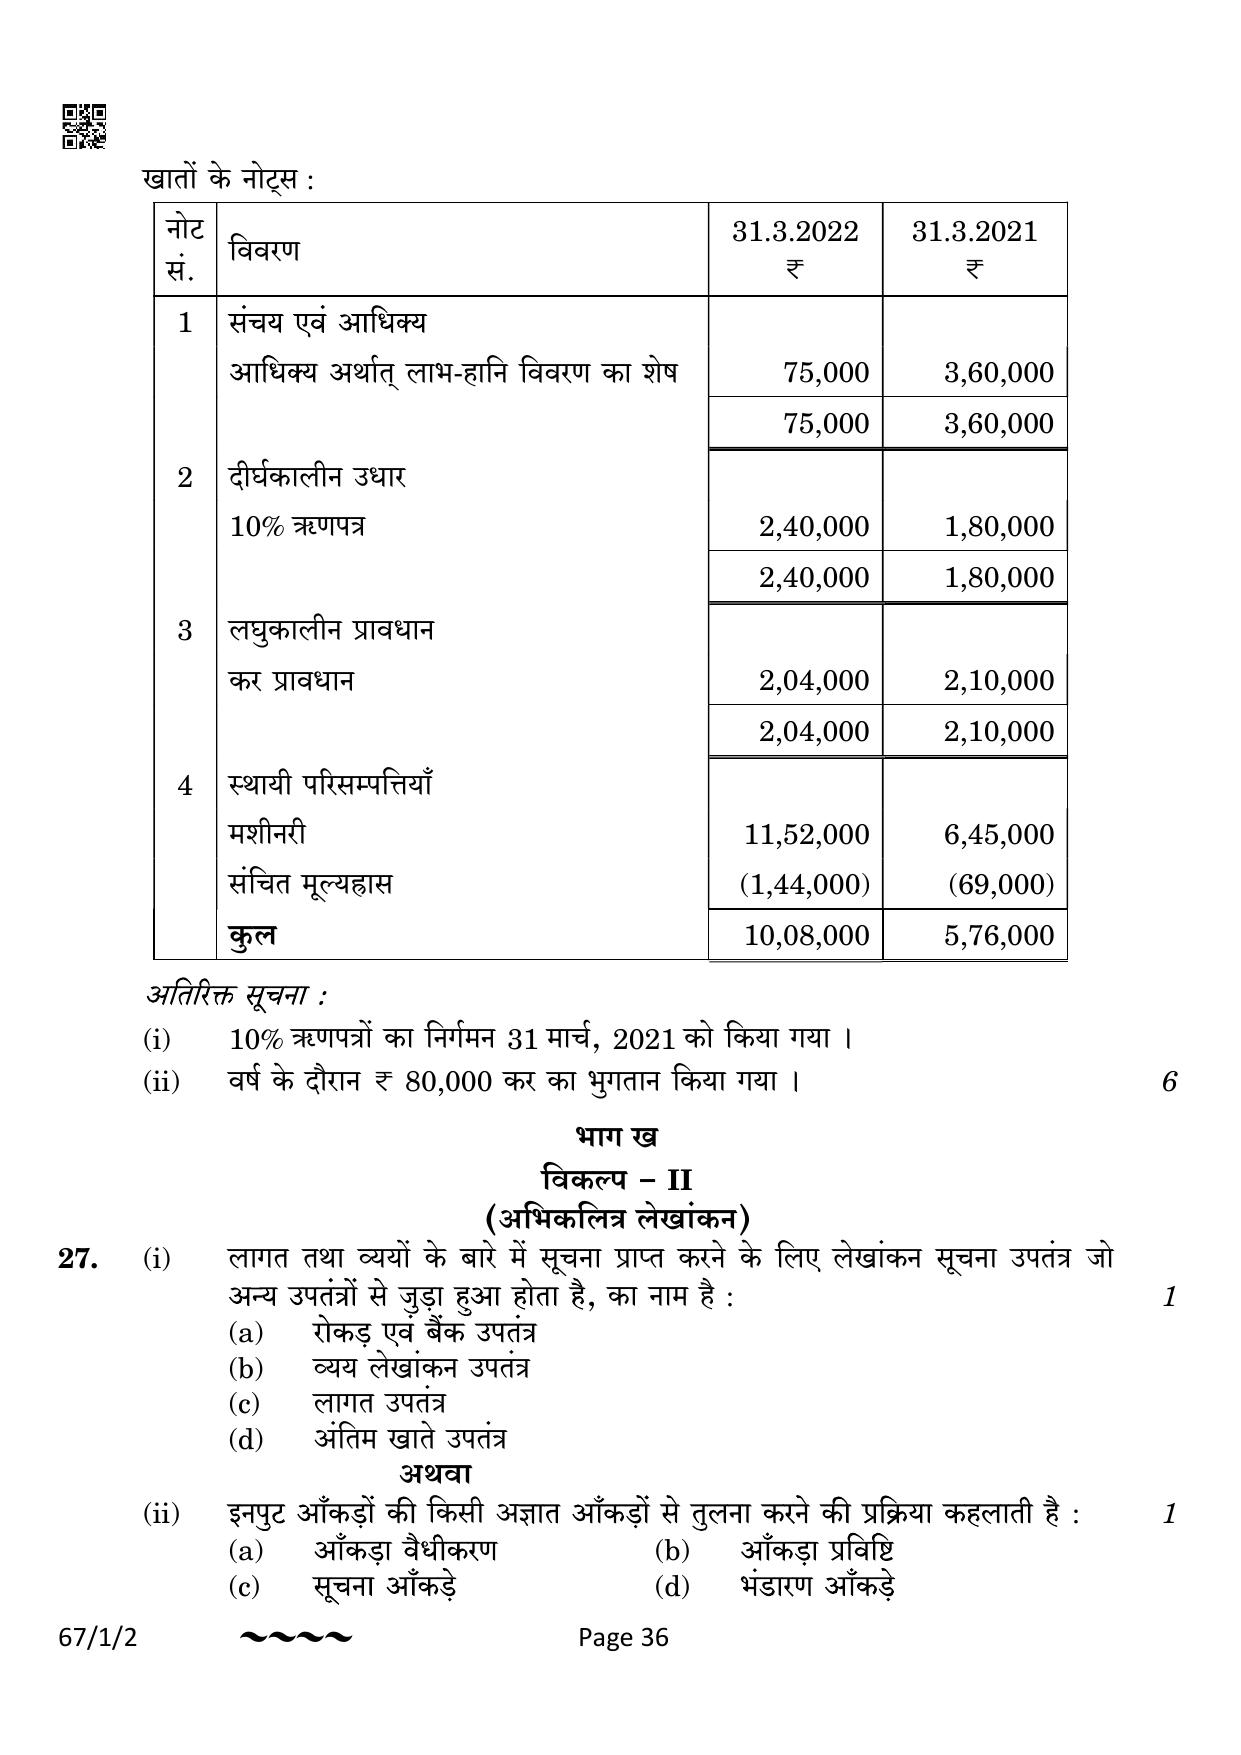 CBSE Class 12 67-1-2 Accountancy 2023 Question Paper - Page 36